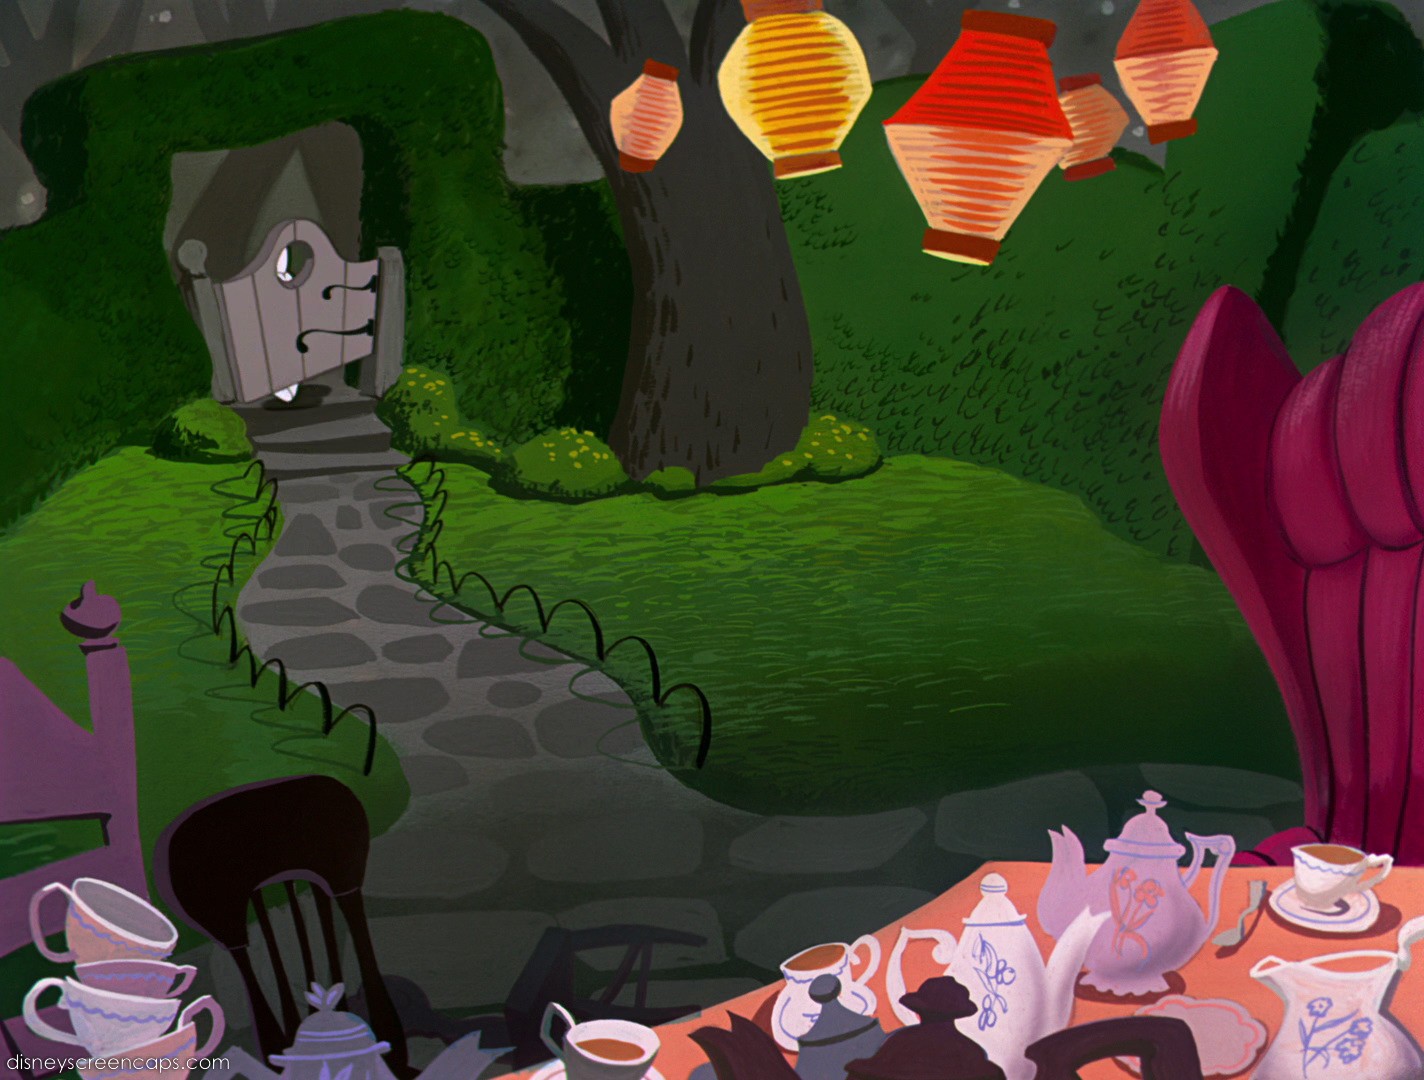 Animated Antic background in Alice in Wonderland are easily some of my favorite in animation. The lush colors are always a sight to behold